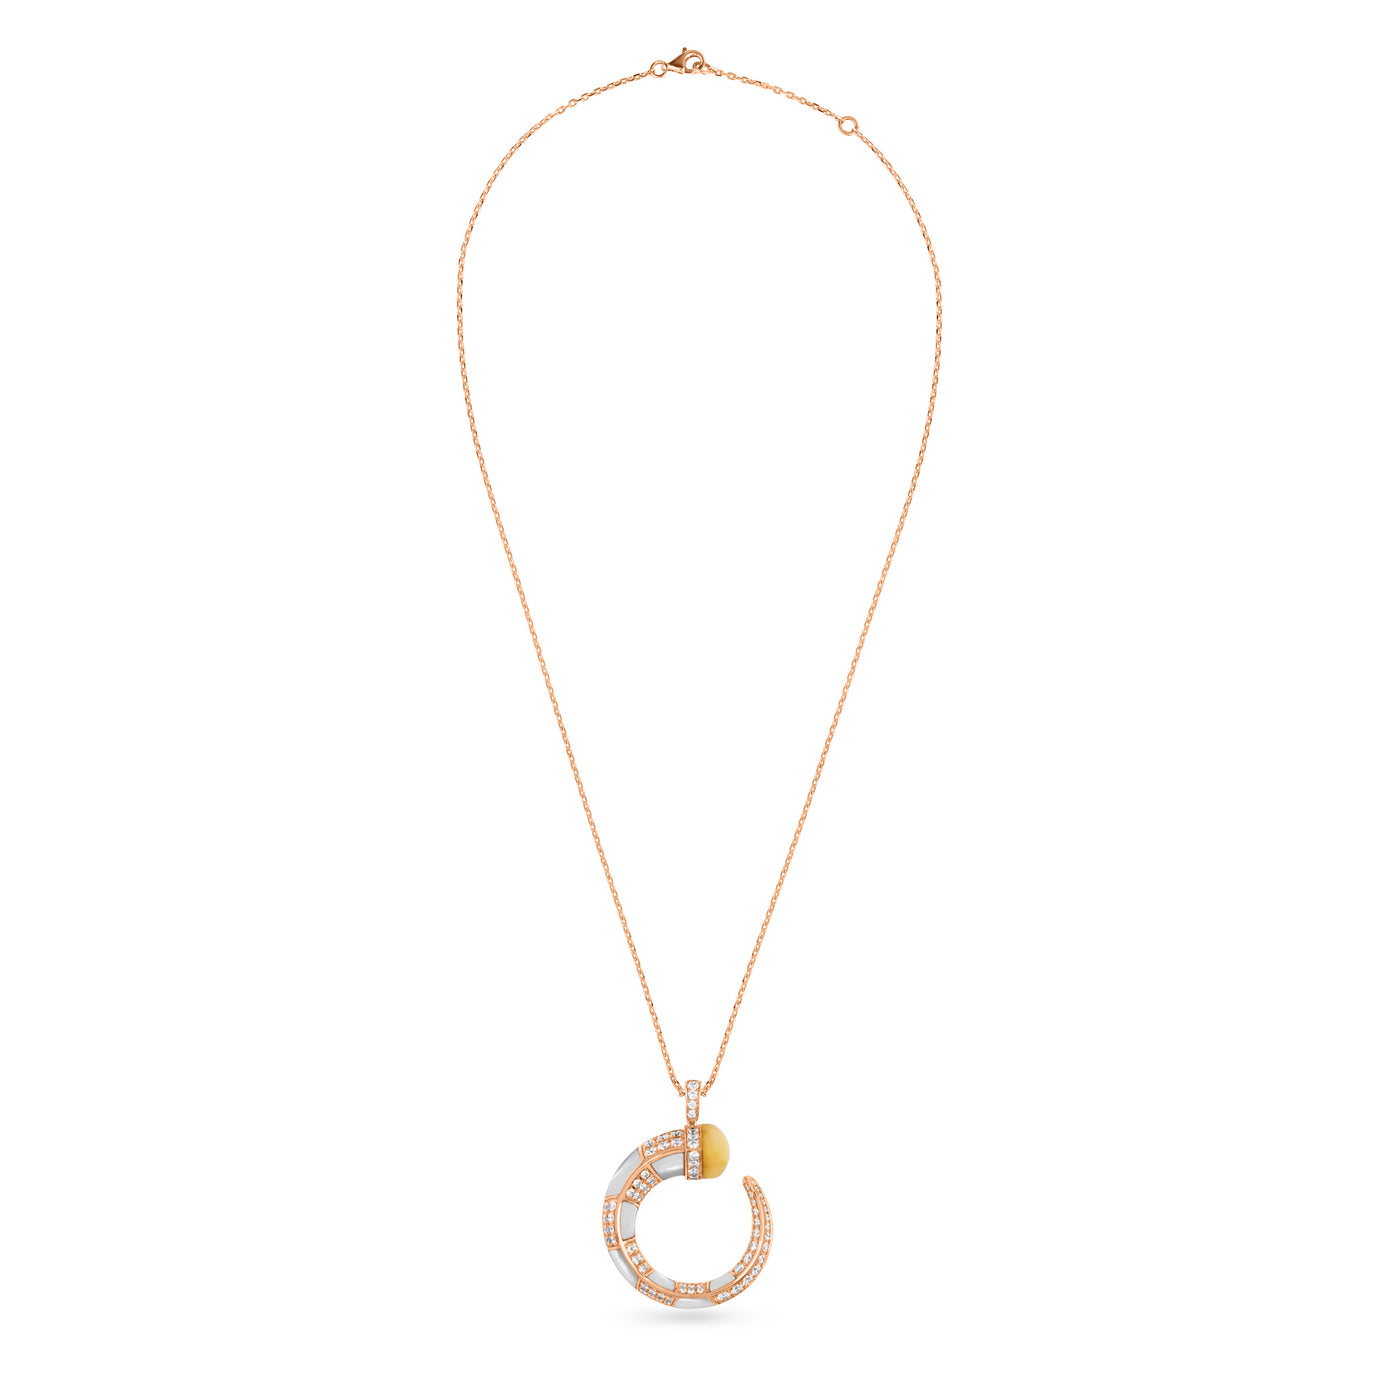 Soit Belle Signature Rose gold diamond pendant With Natural Opal